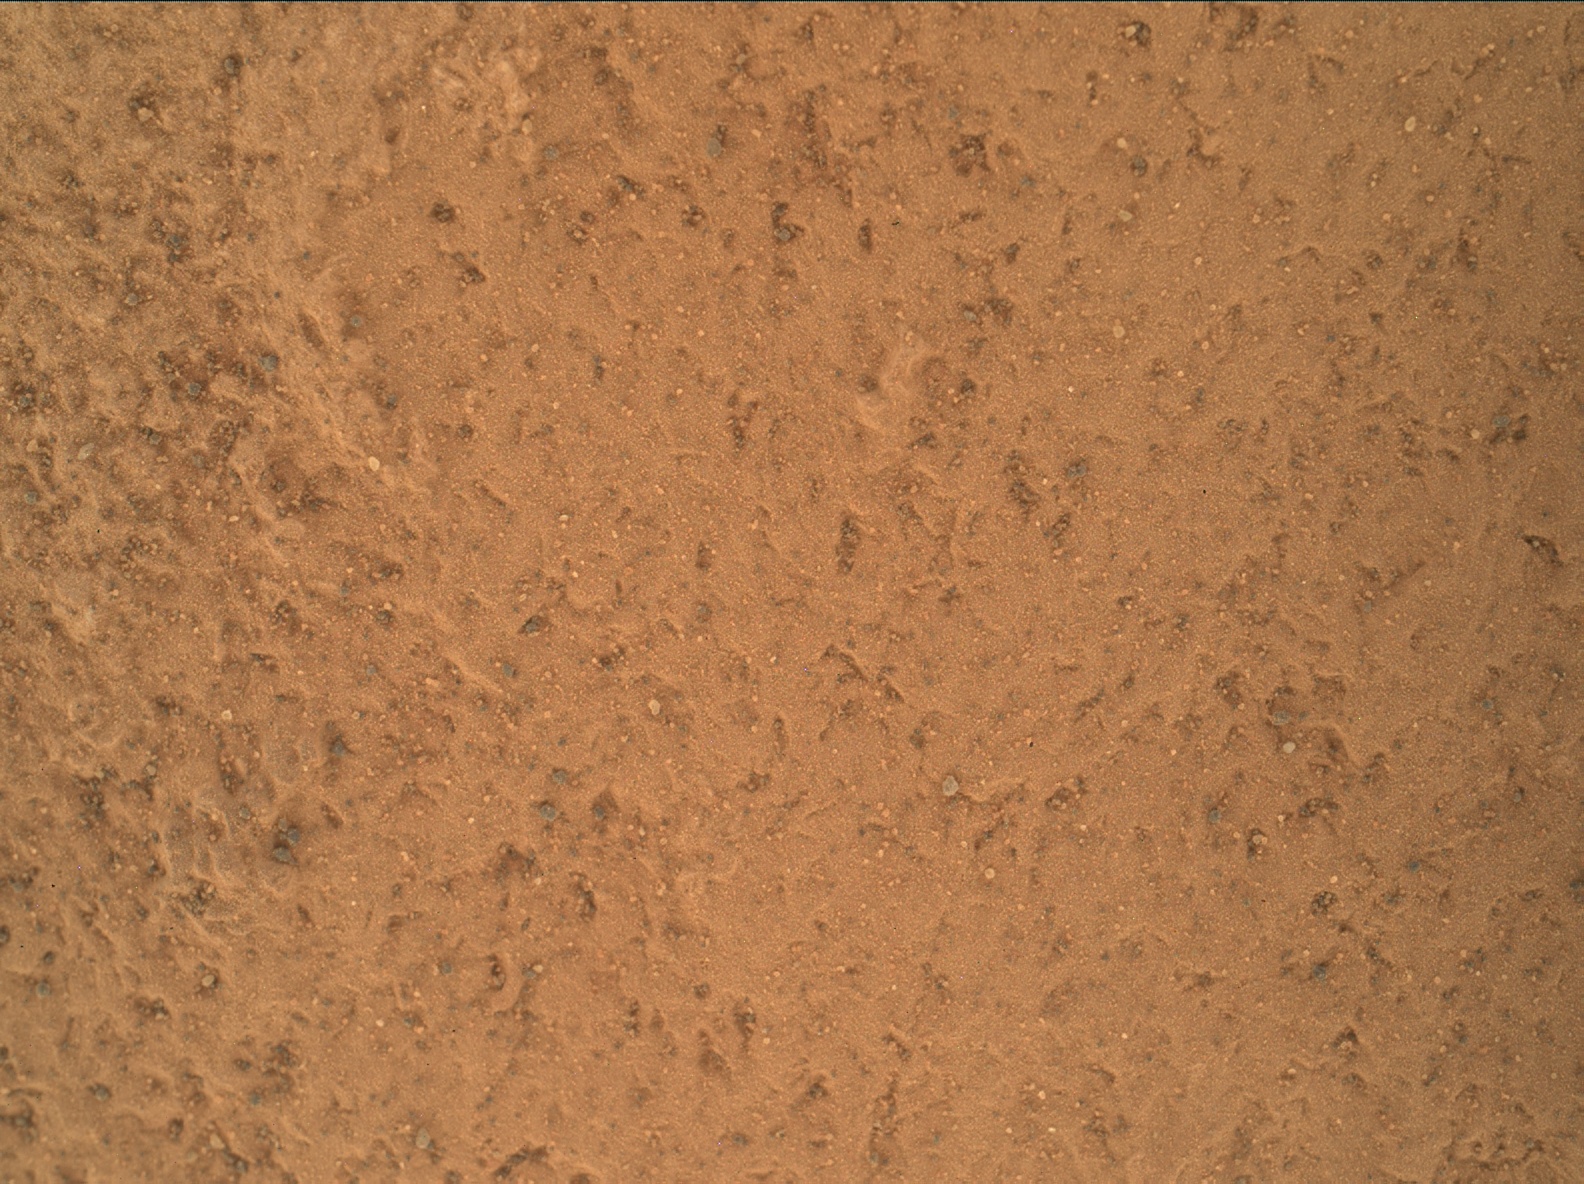 Nasa's Mars rover Curiosity acquired this image using its Mars Hand Lens Imager (MAHLI) on Sol 1802